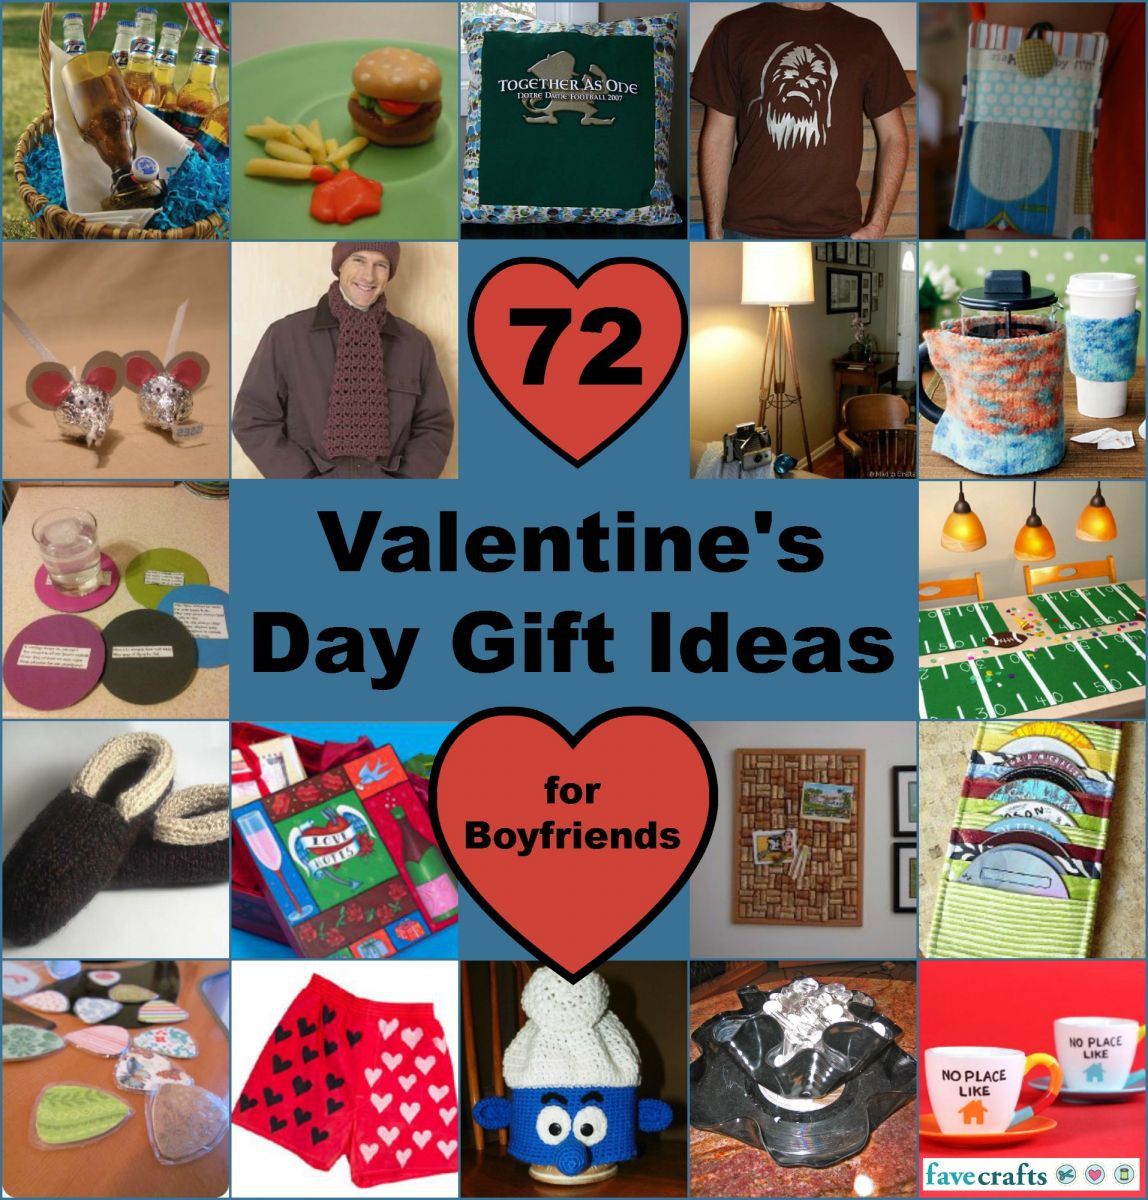 Valentines Day Gift For Boyfriend
 Top 15 Favorite Valentine s Arts and Crafts Videos and